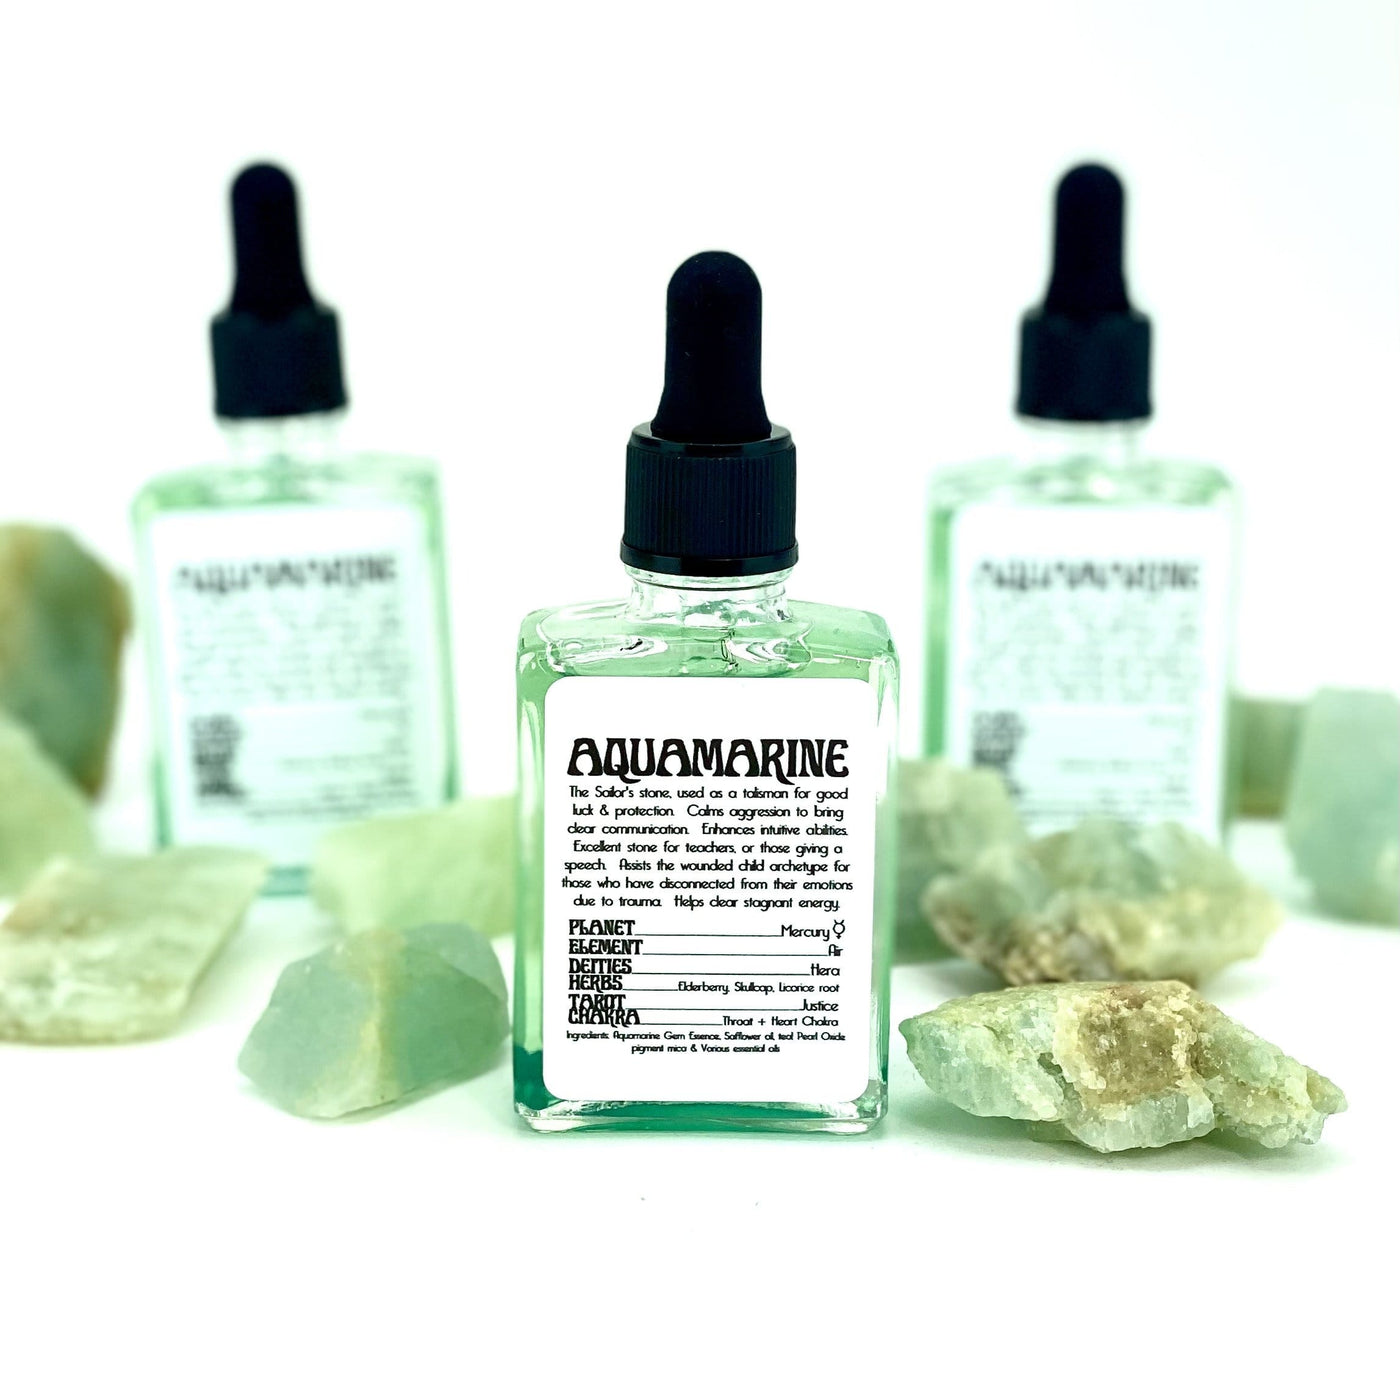 up close of the Aquamarine Gem Essence bottle showing details in the label and showing green hue liquid